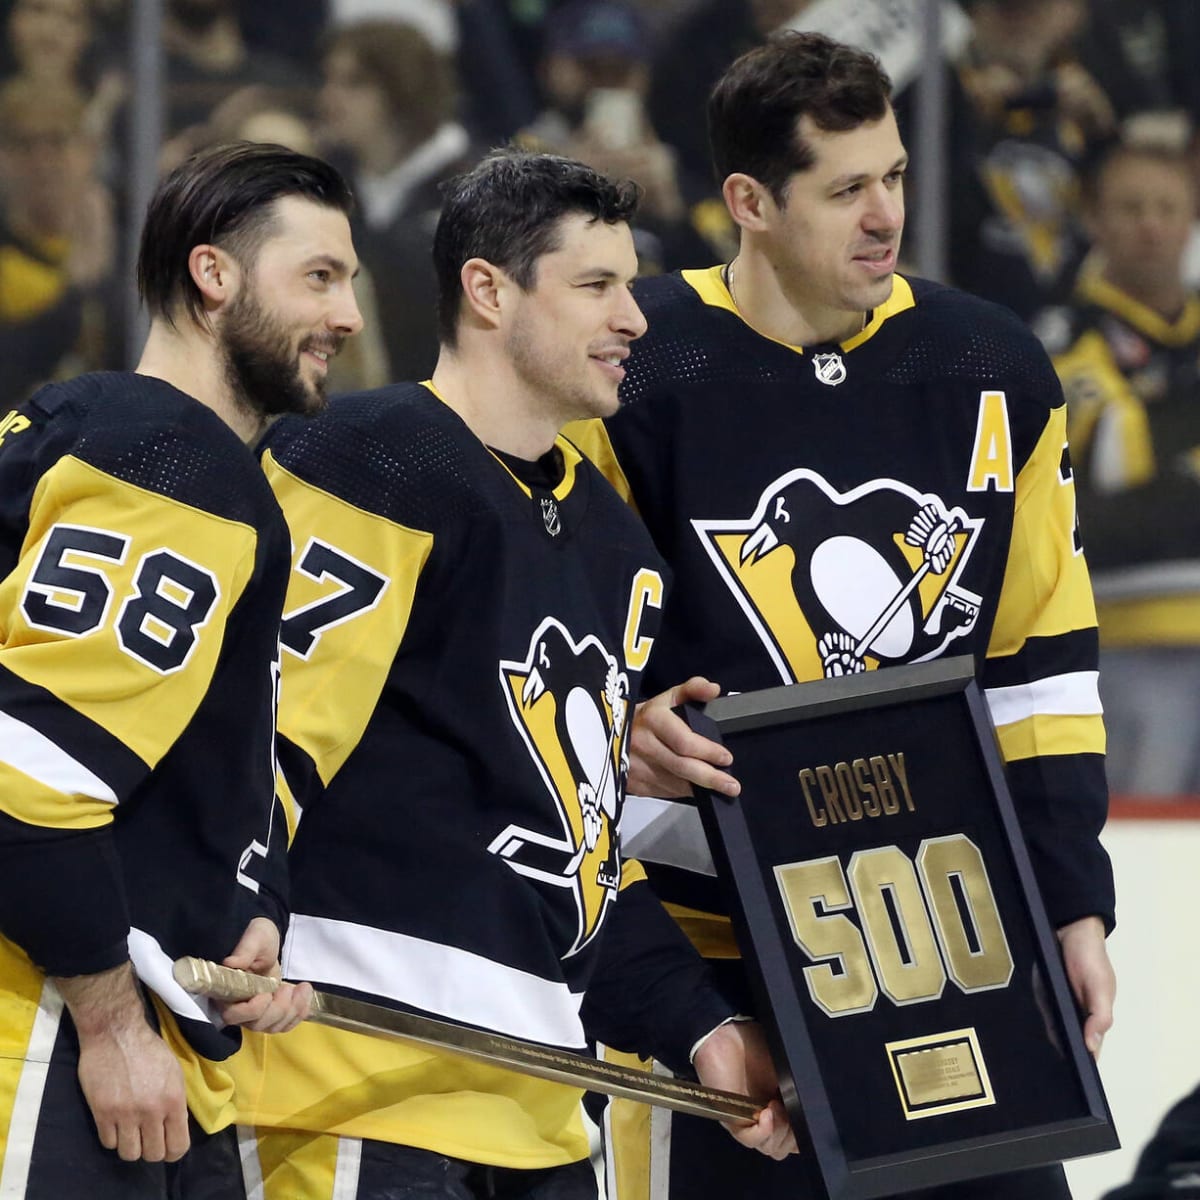 Penguins trio ties Yankees greats for most seasons spent together